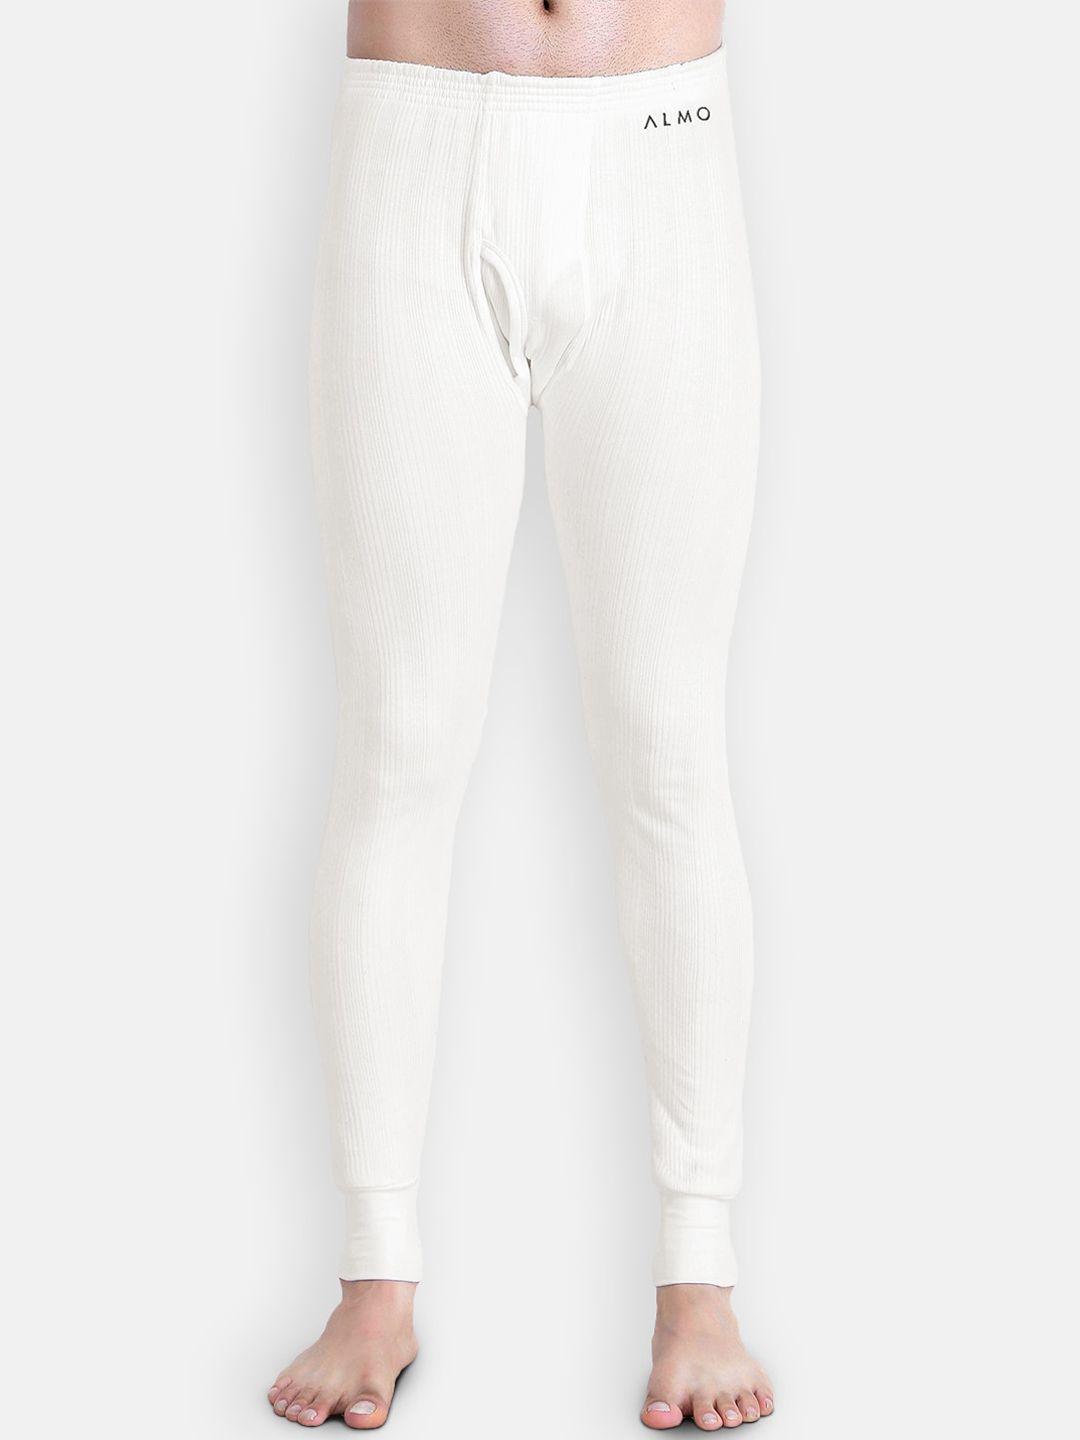 Almo Wear Men Off White Solid Cotton Thermal Bottoms